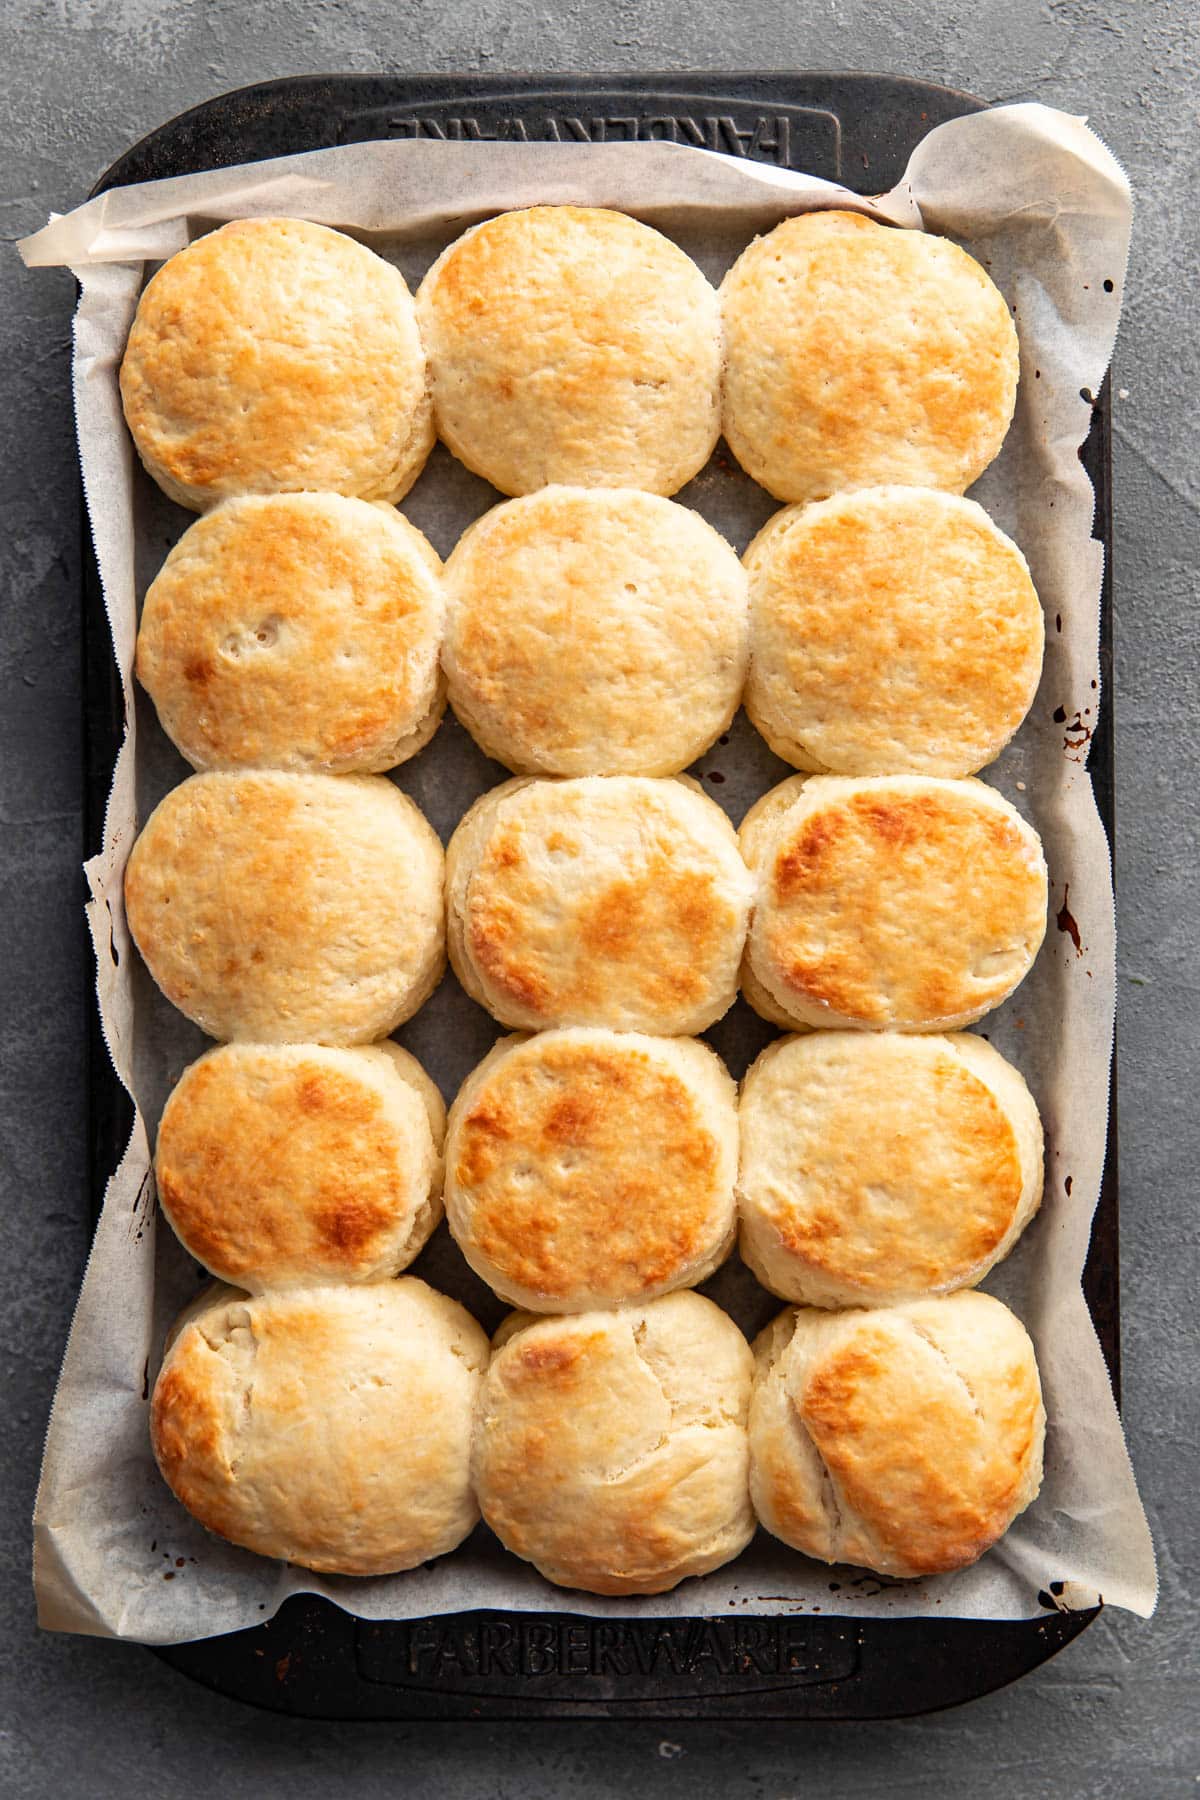 biscuits in a pan after baking